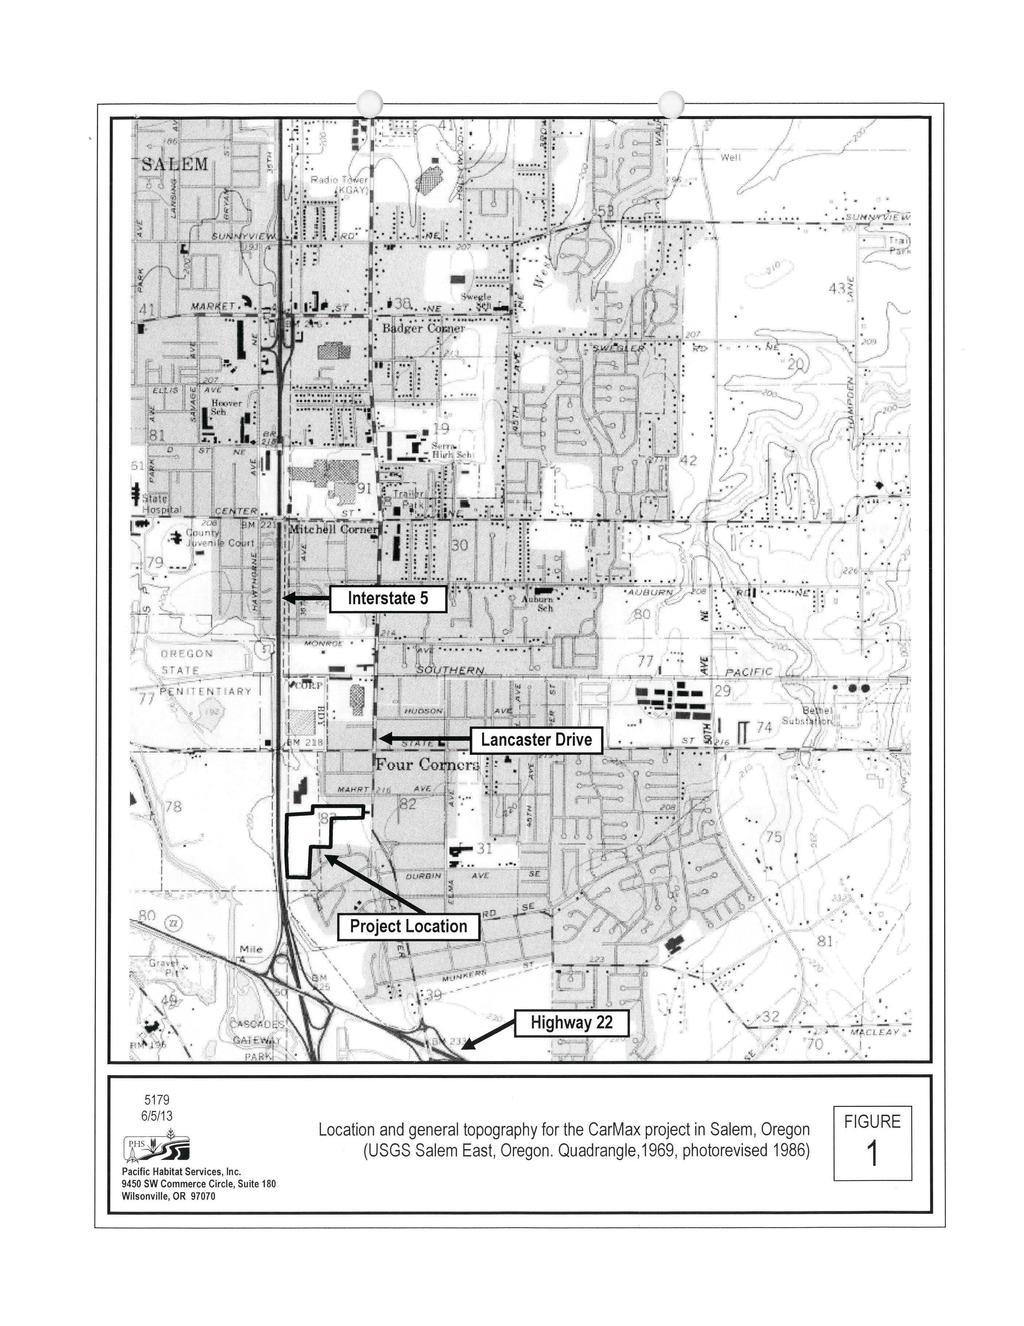 5179 6/5/13 Location and general topography for the CarMax project in Salem, Oregon (USGS Salem East, Oregon.